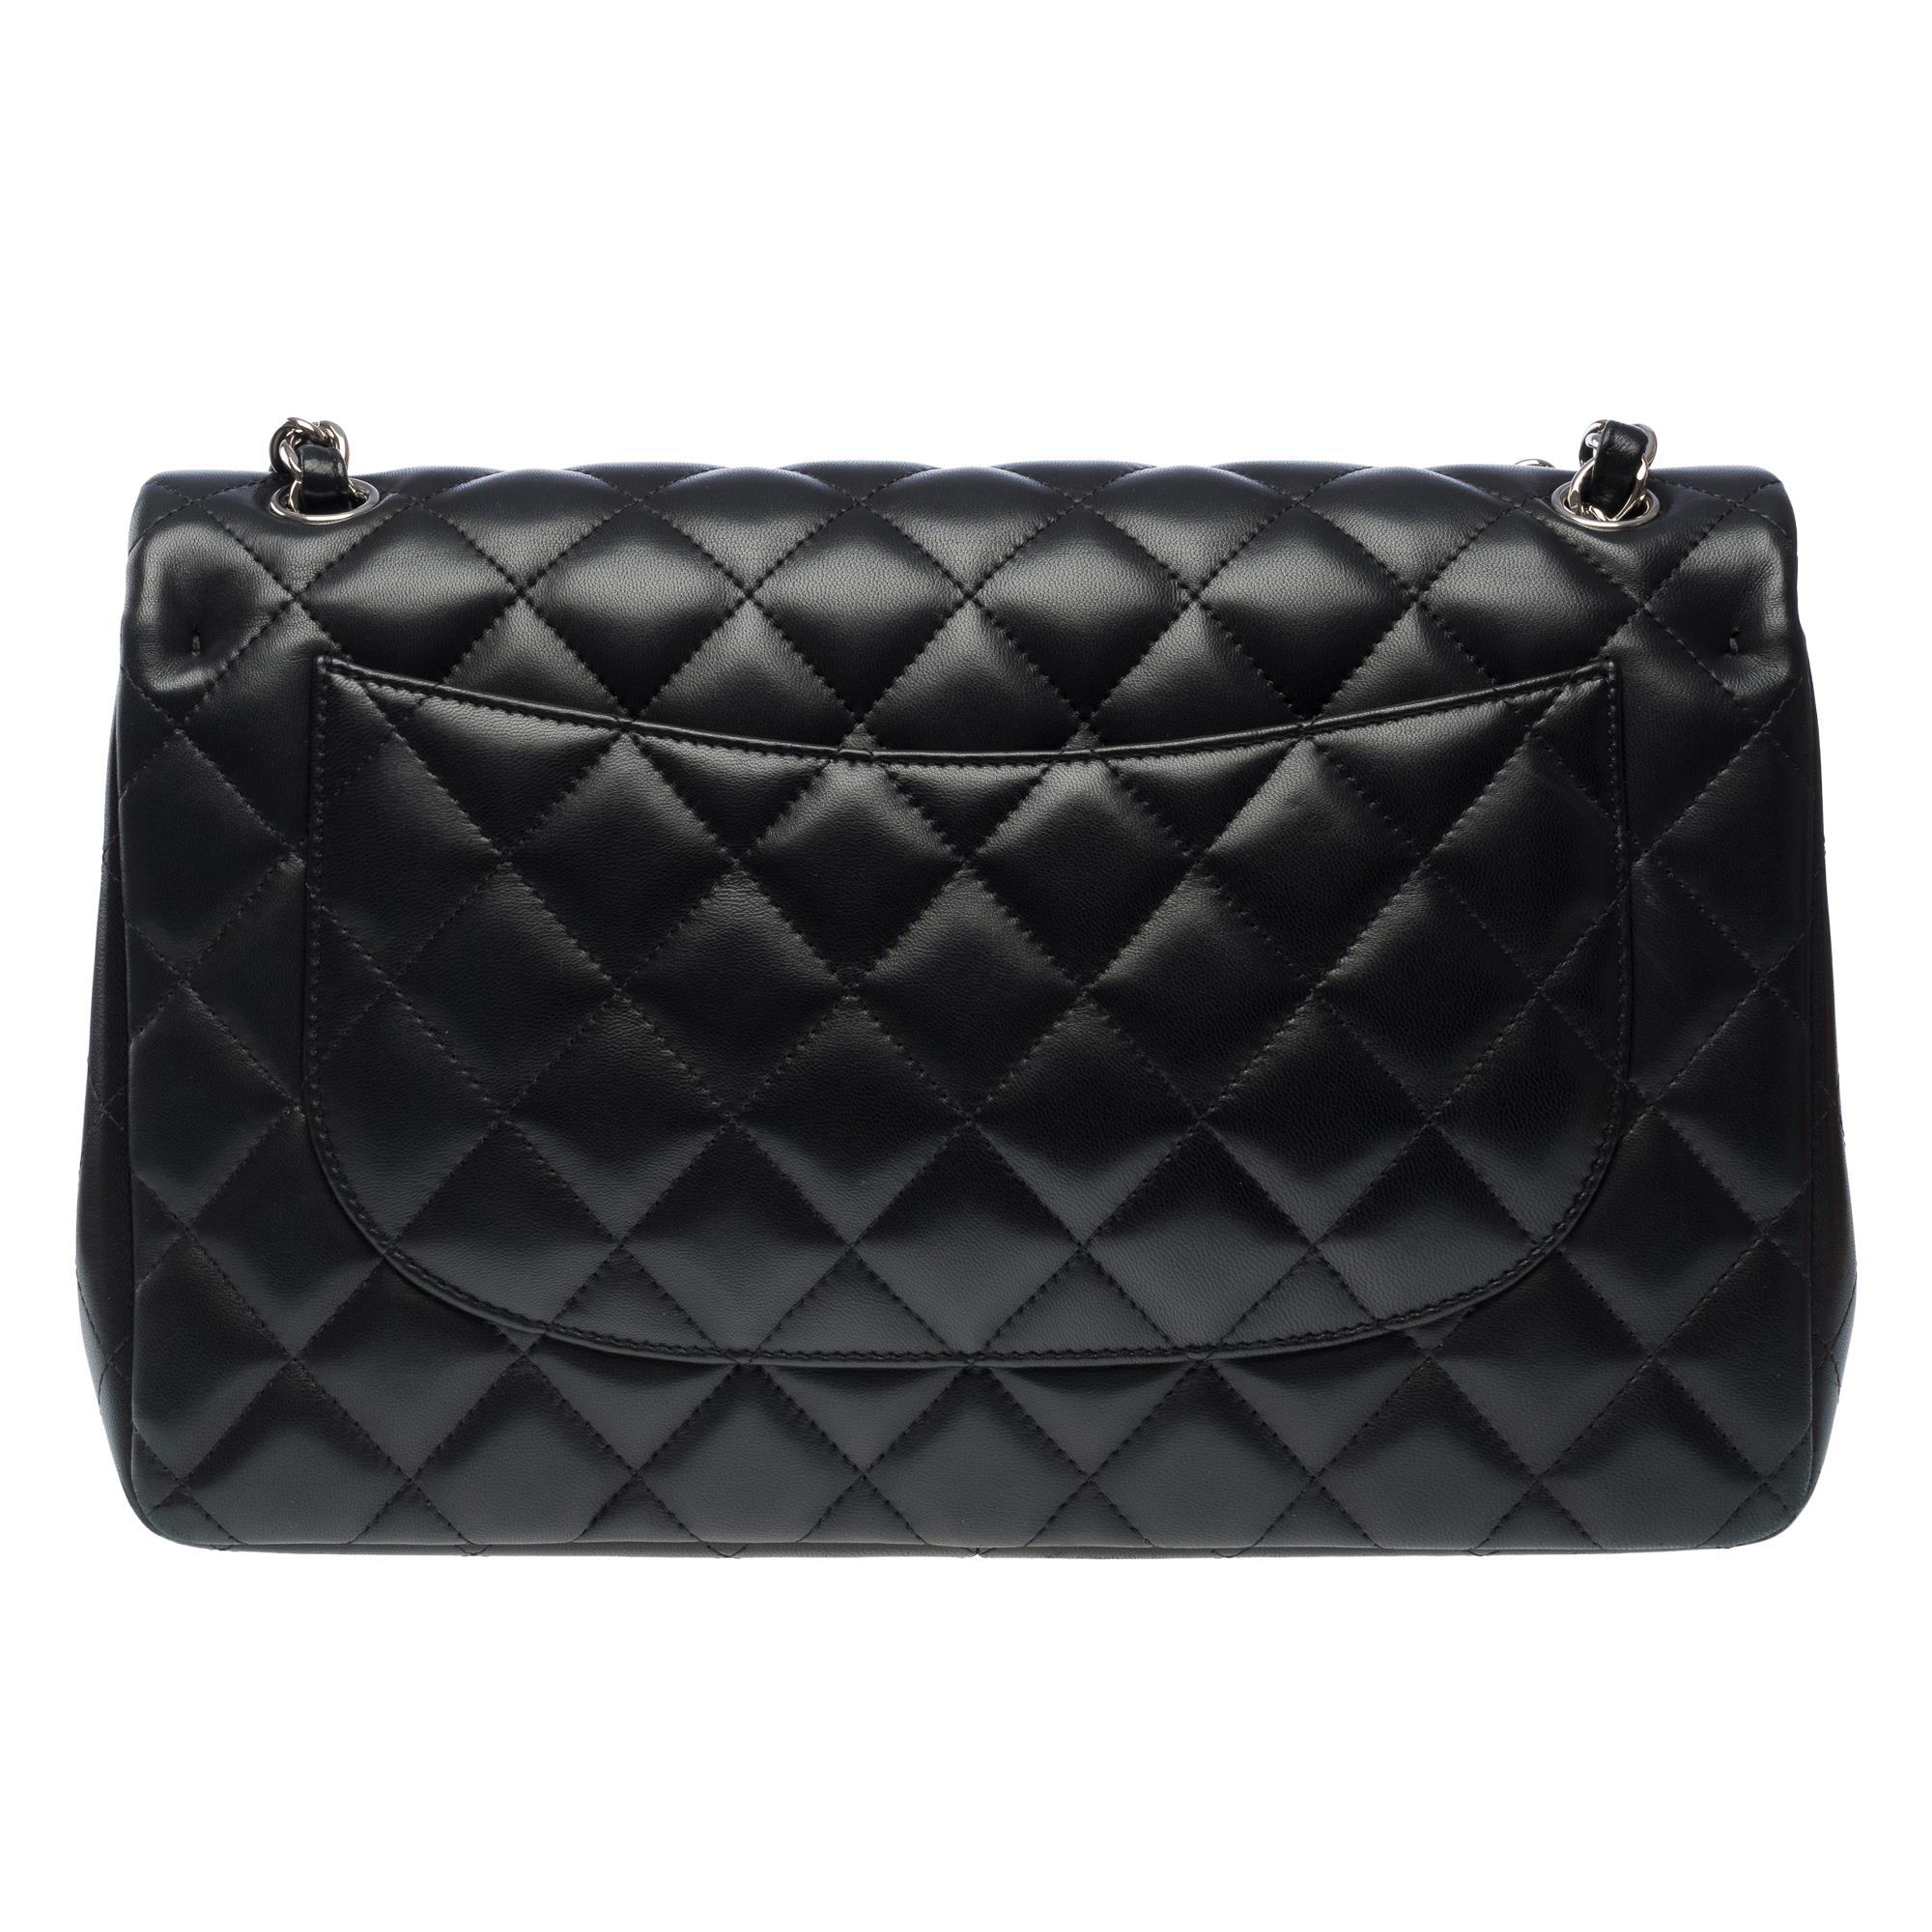 Women's Chanel Timeless Jumbo double flap shoulder bag in black quilted lambskin , SHW For Sale